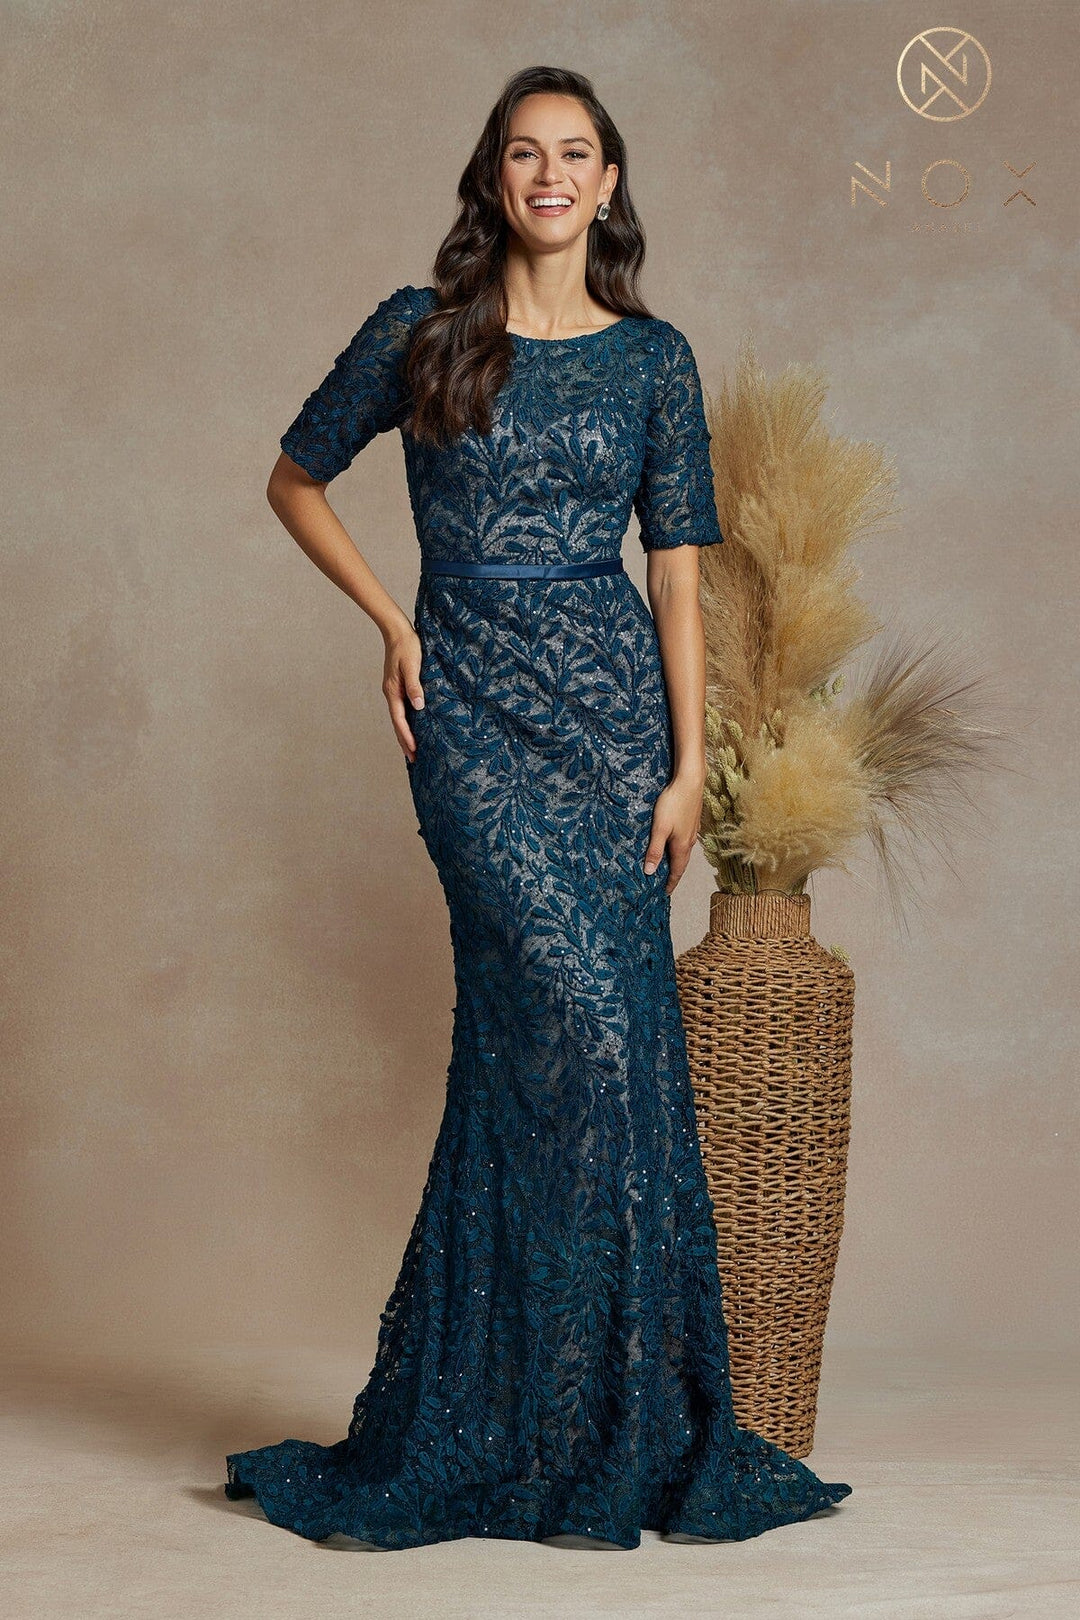 Fitted Applique Mid-Sleeve Gown by Nox Anabel JQ506